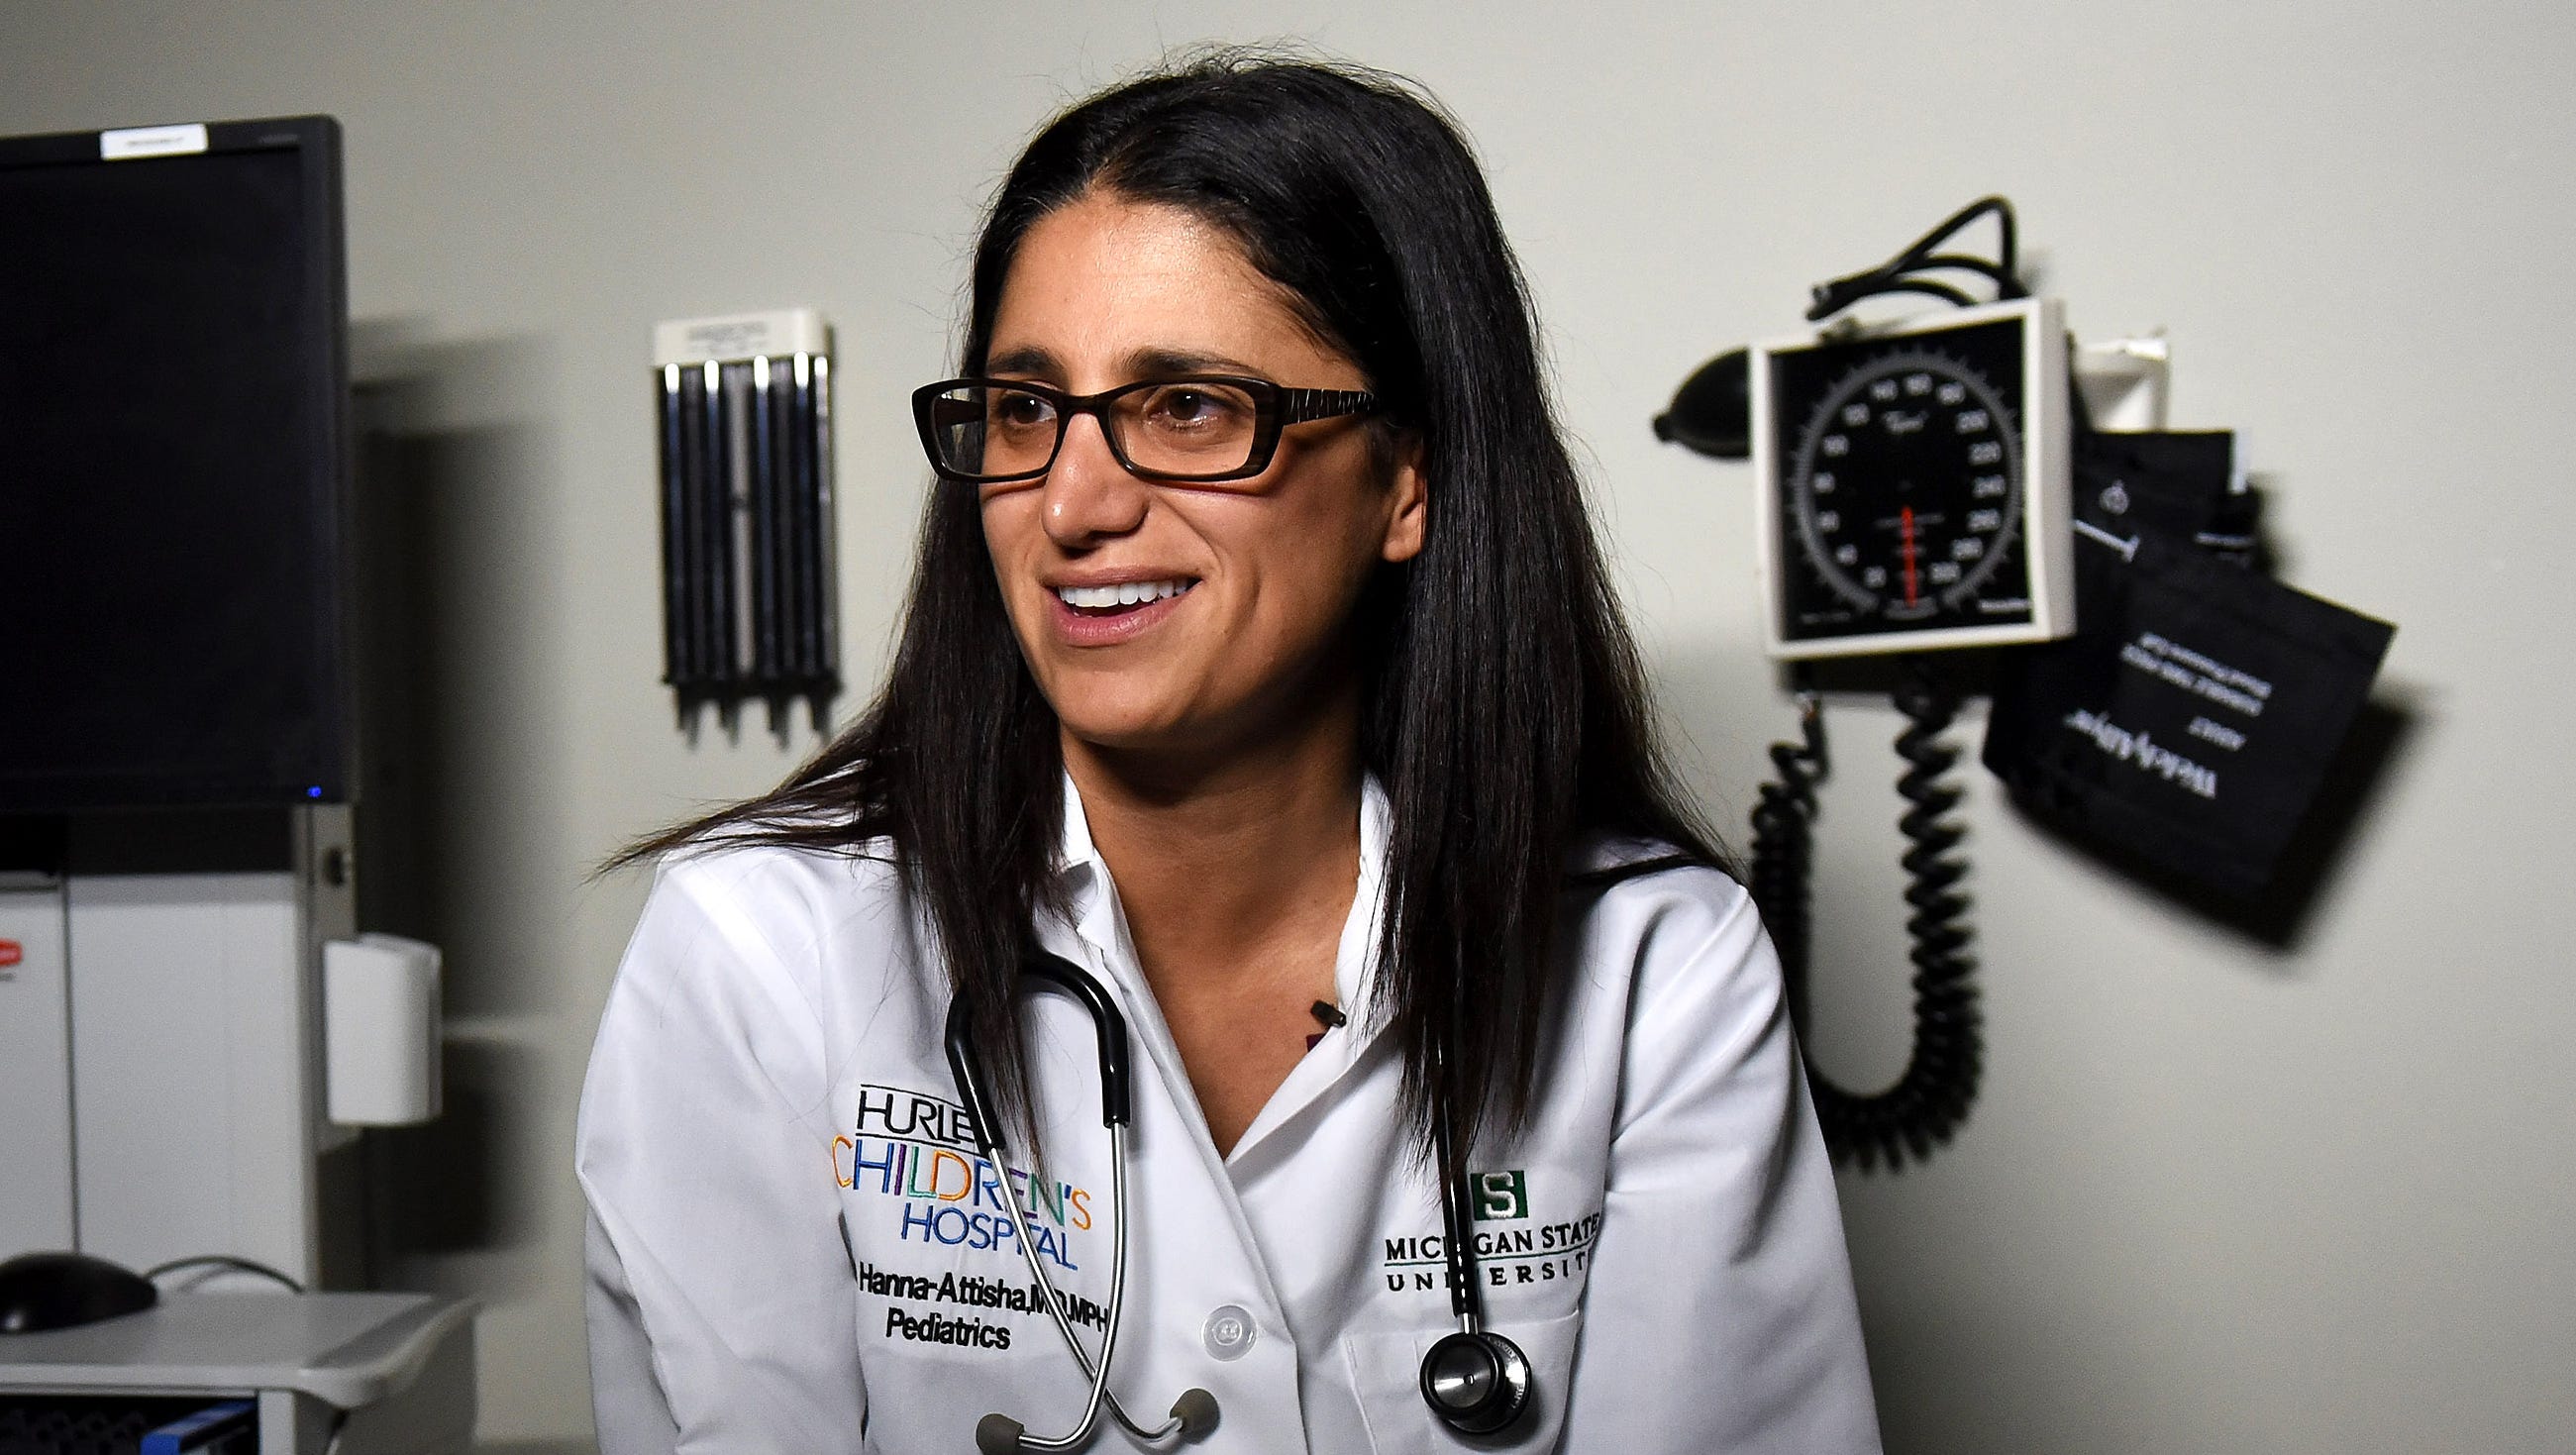 Mona Hanna-Attisha, director of pediatric residency at Hurley Children's Hospital in Flint, conducted a study that found the percentage of elevated blood-lead levels among children in the city had doubled. She persisted in the face of state denials, and eventually a state and federal emergency was declared. "When it's my kids that are at stake, I don't give up," she said.